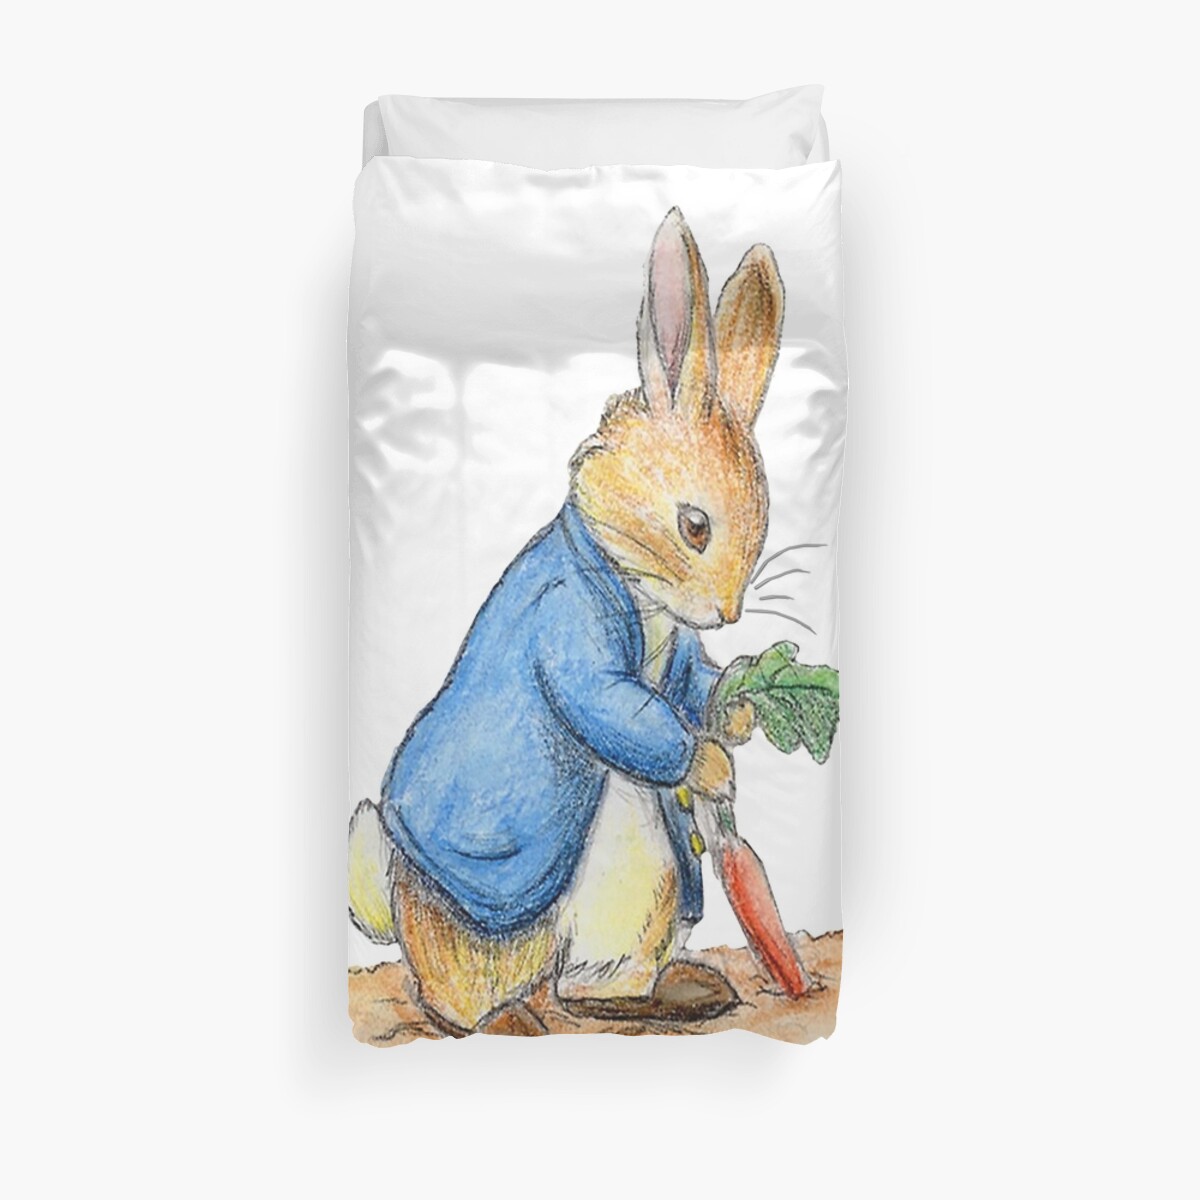 Nursery Characters Peter Rabbit Beatrix Potter Duvet Cover By